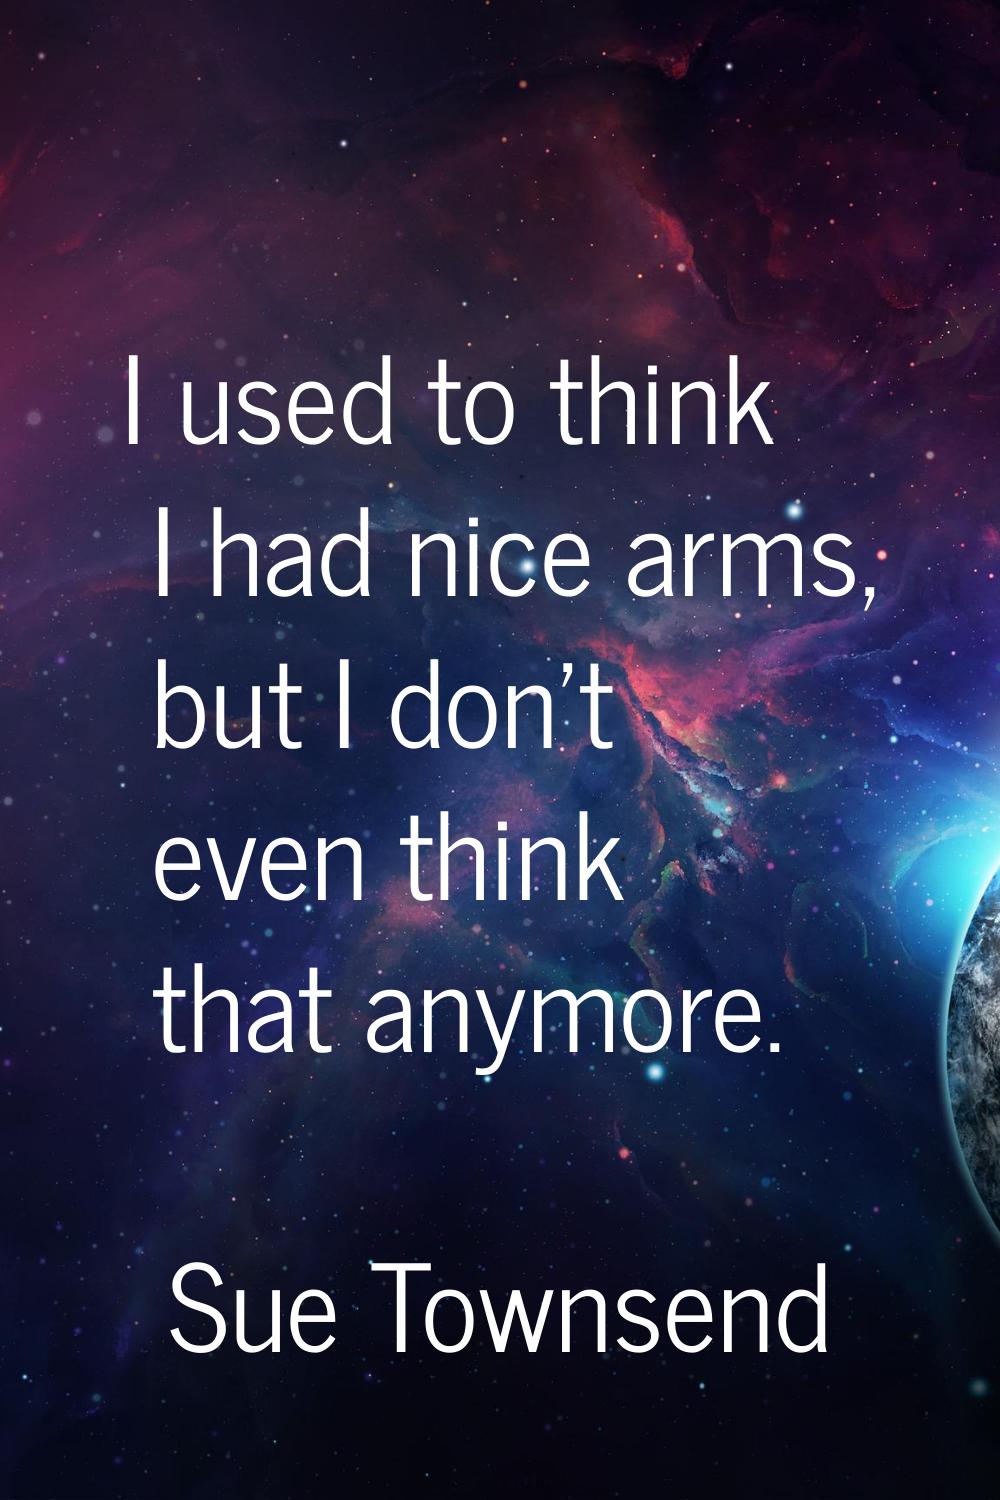 I used to think I had nice arms, but I don't even think that anymore.